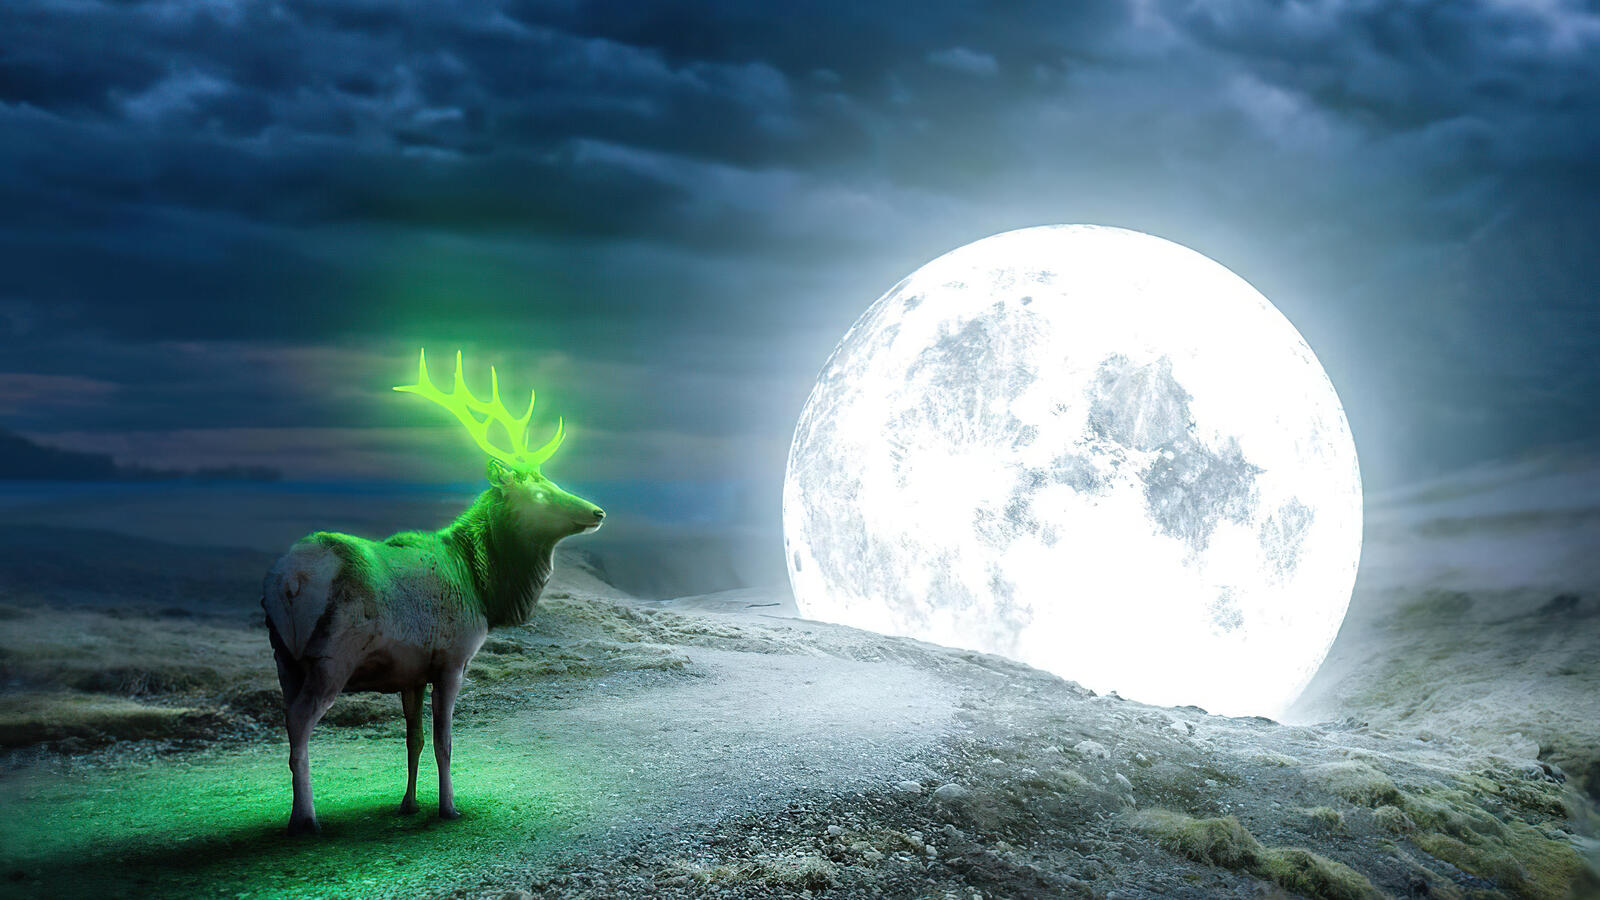 Free photo Fantastic picture of a deer with glowing green antlers